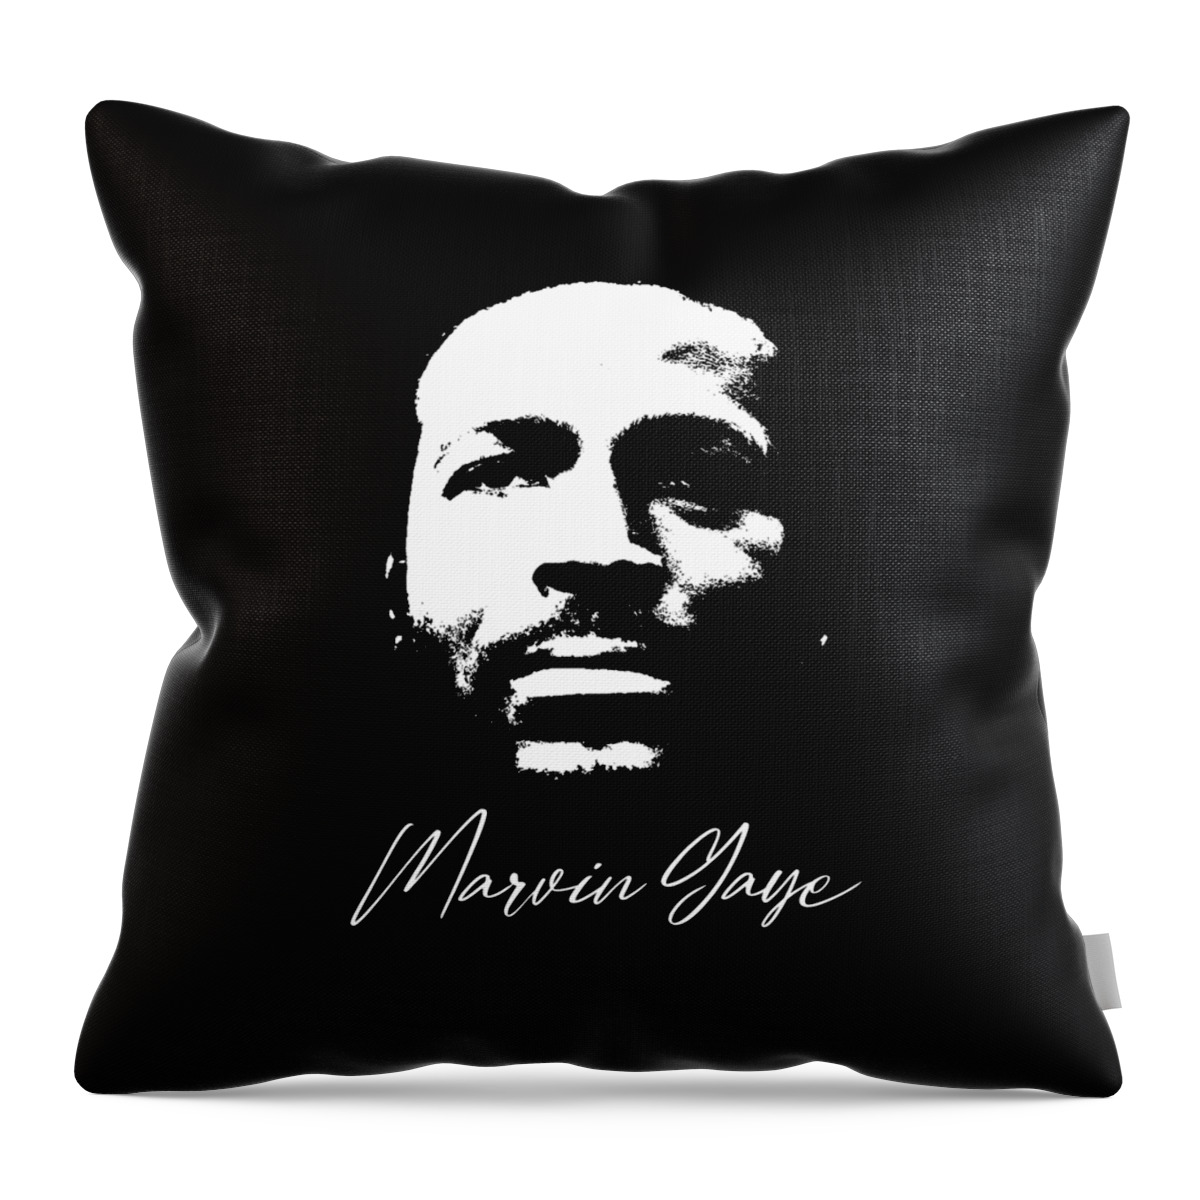 Marvin Gaye Throw Pillow featuring the digital art Marvin Gaye Signature by Notorious Artist